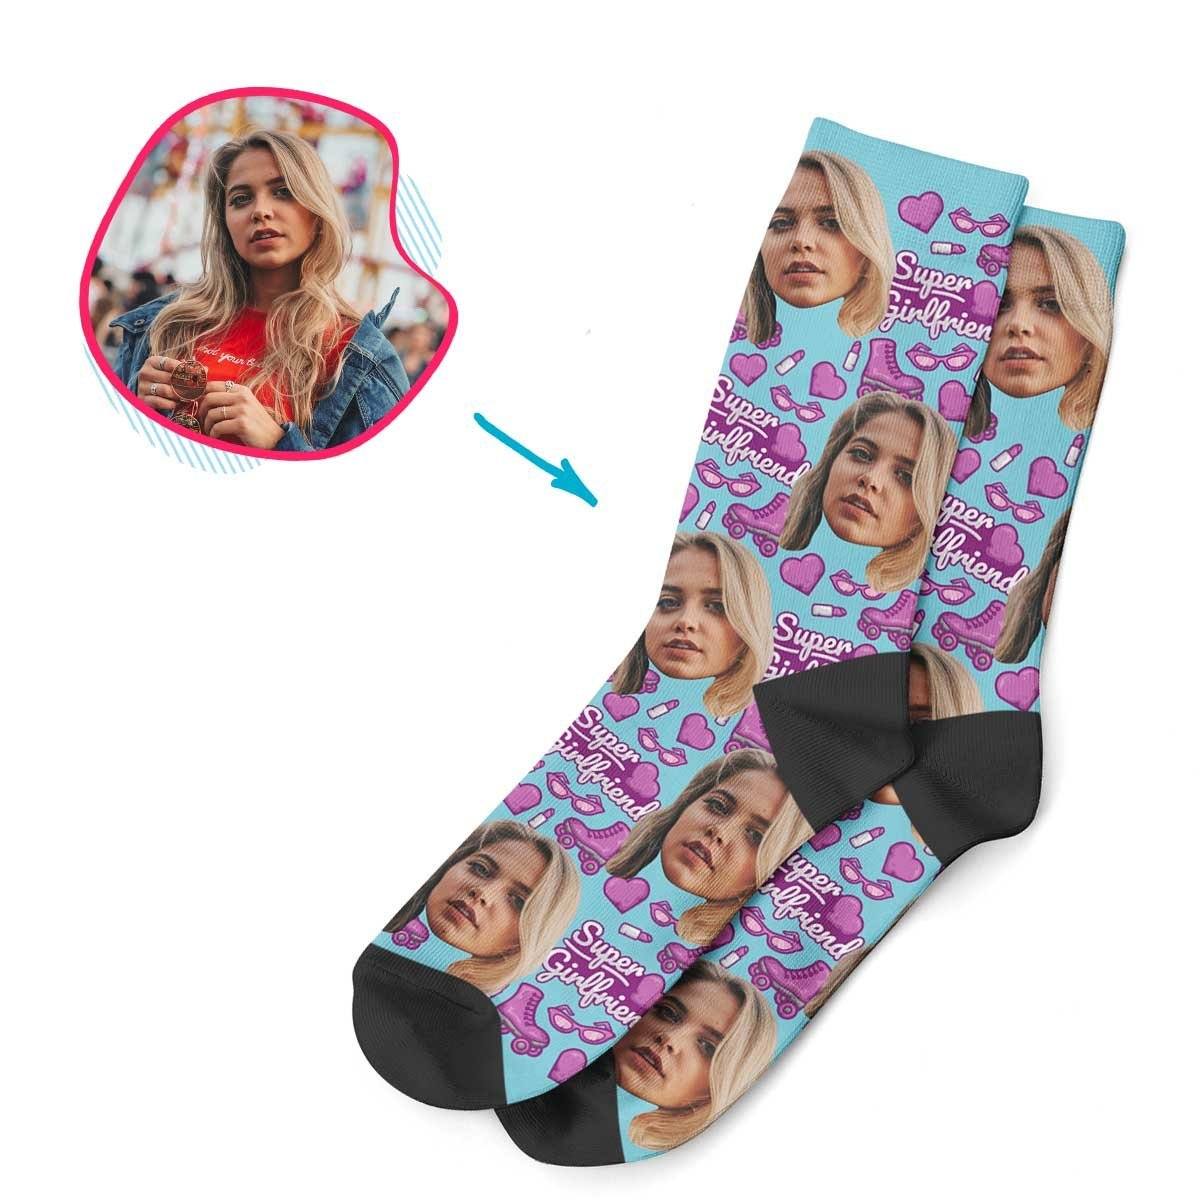 Blue Girlfriend personalized socks with photo of face printed on them